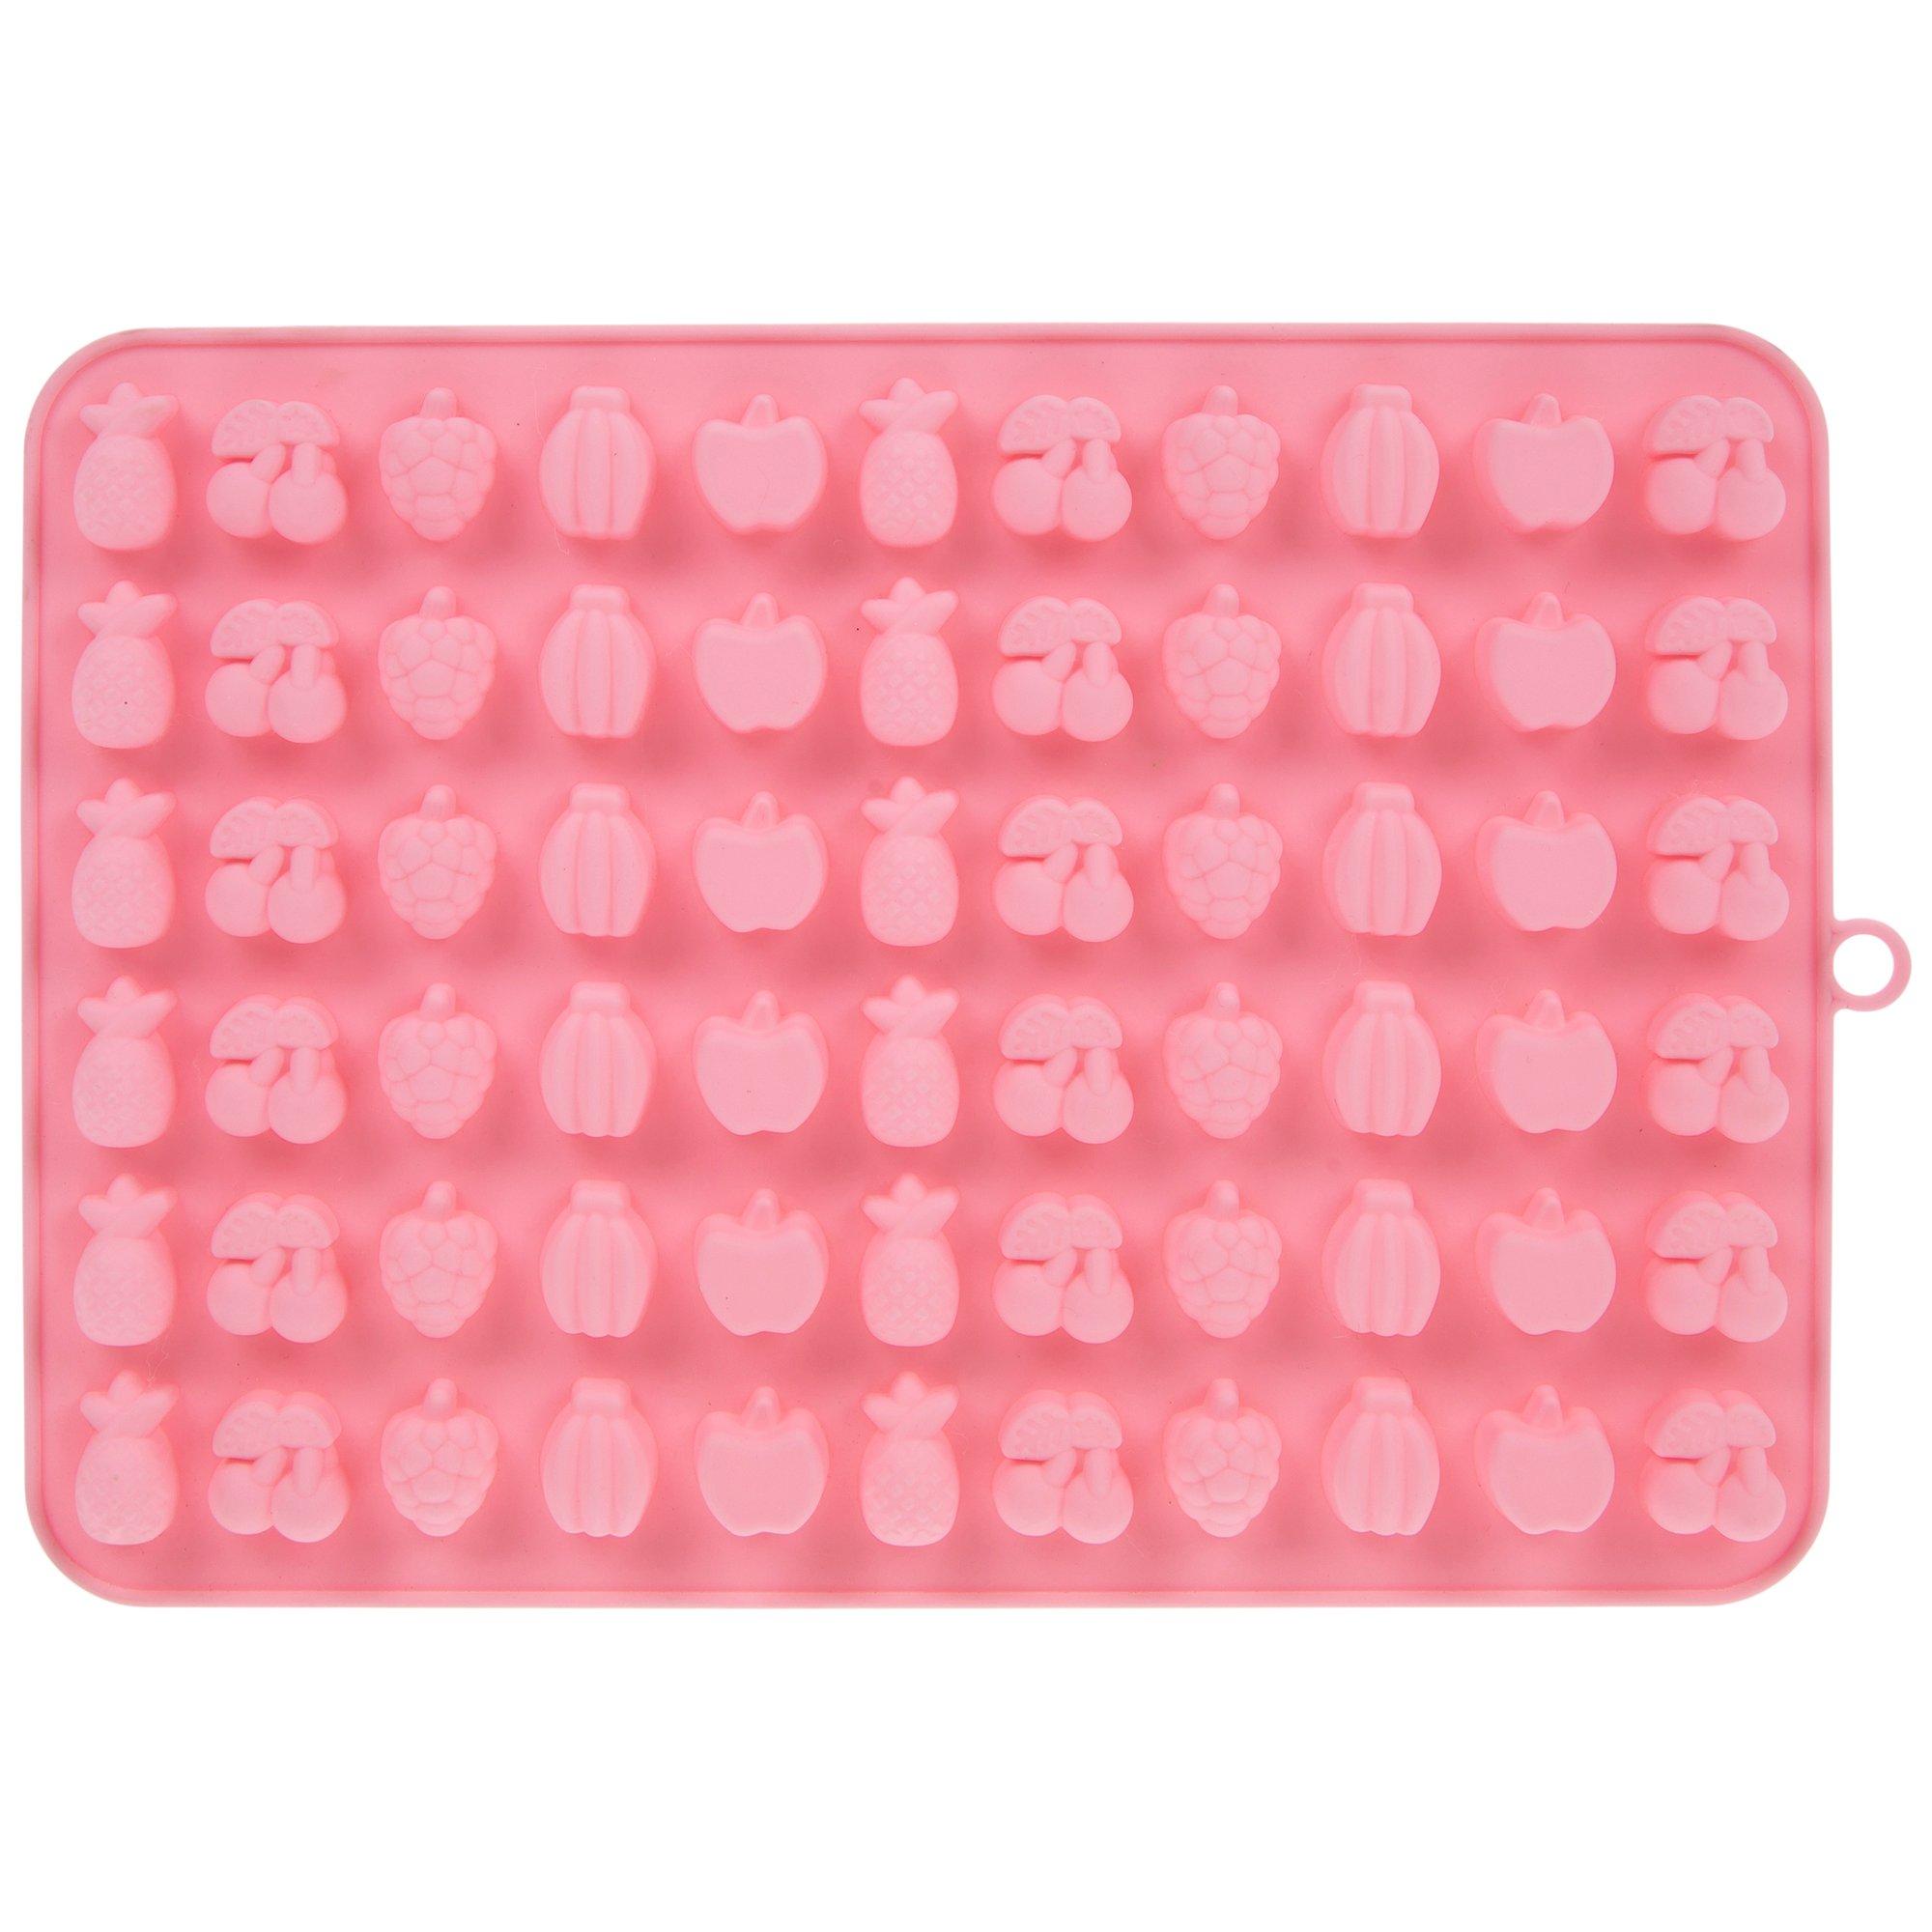 Leaves Silicone Candy Mold, Hobby Lobby